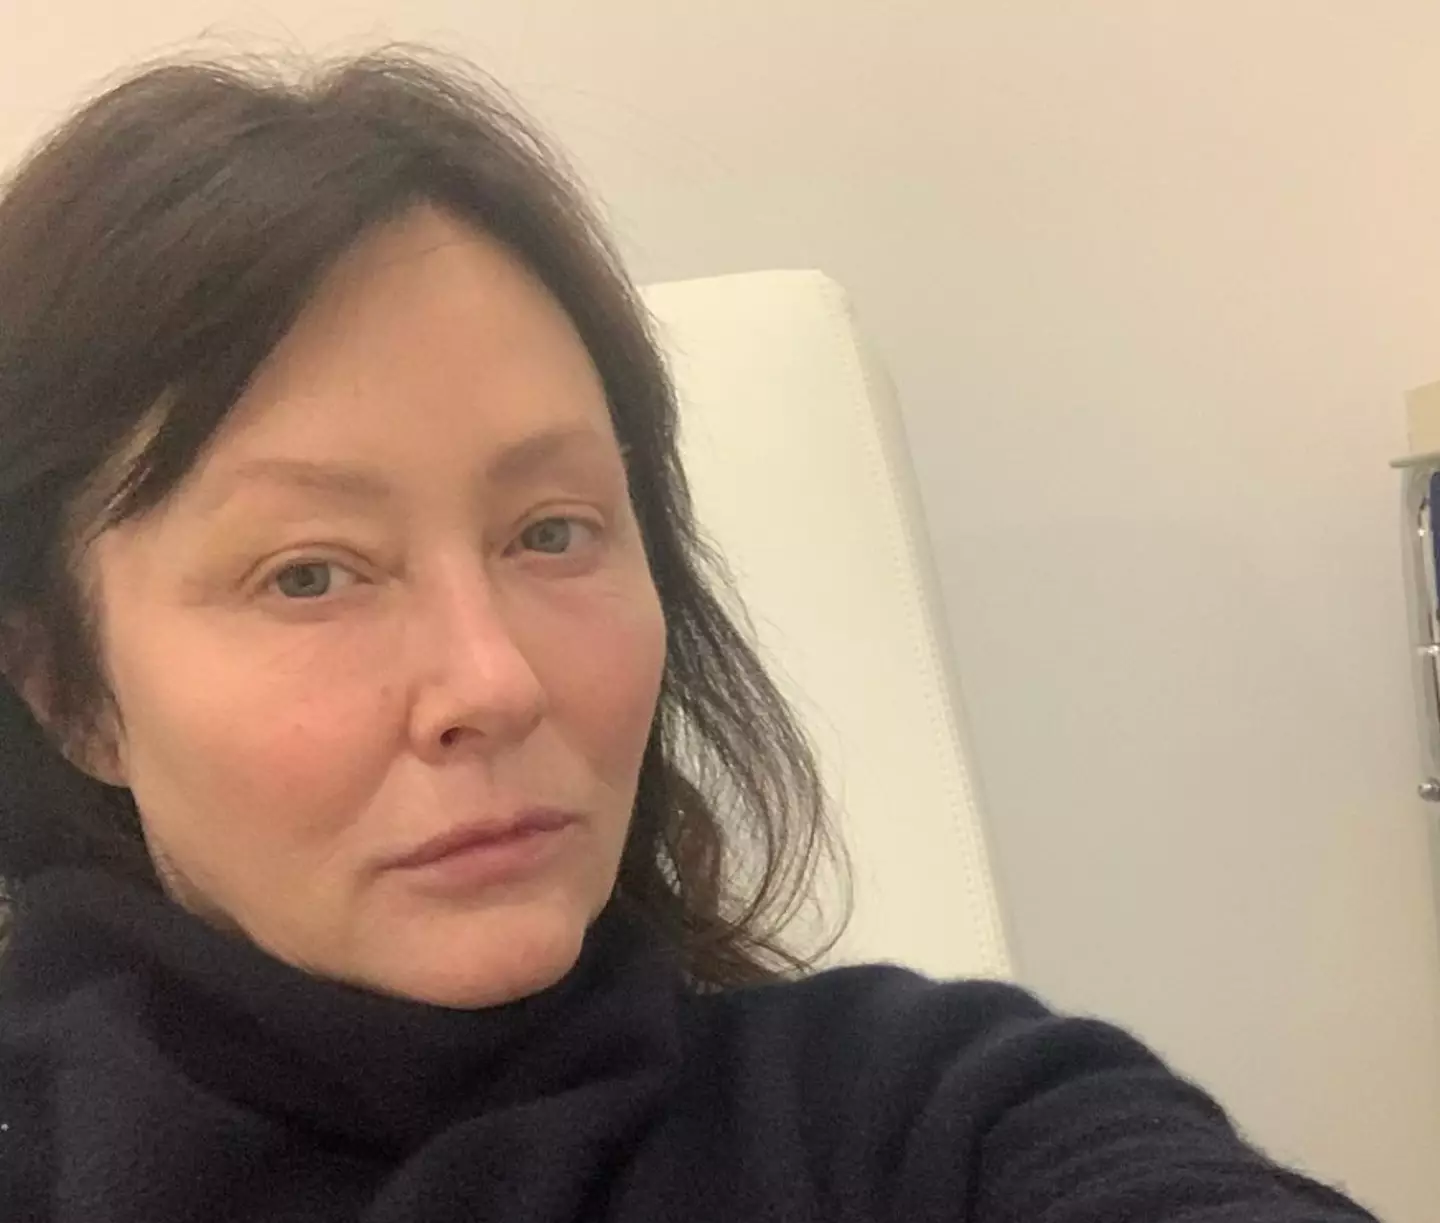 Shannen Doherty has stage four breast cancer which has now spread to her bones.